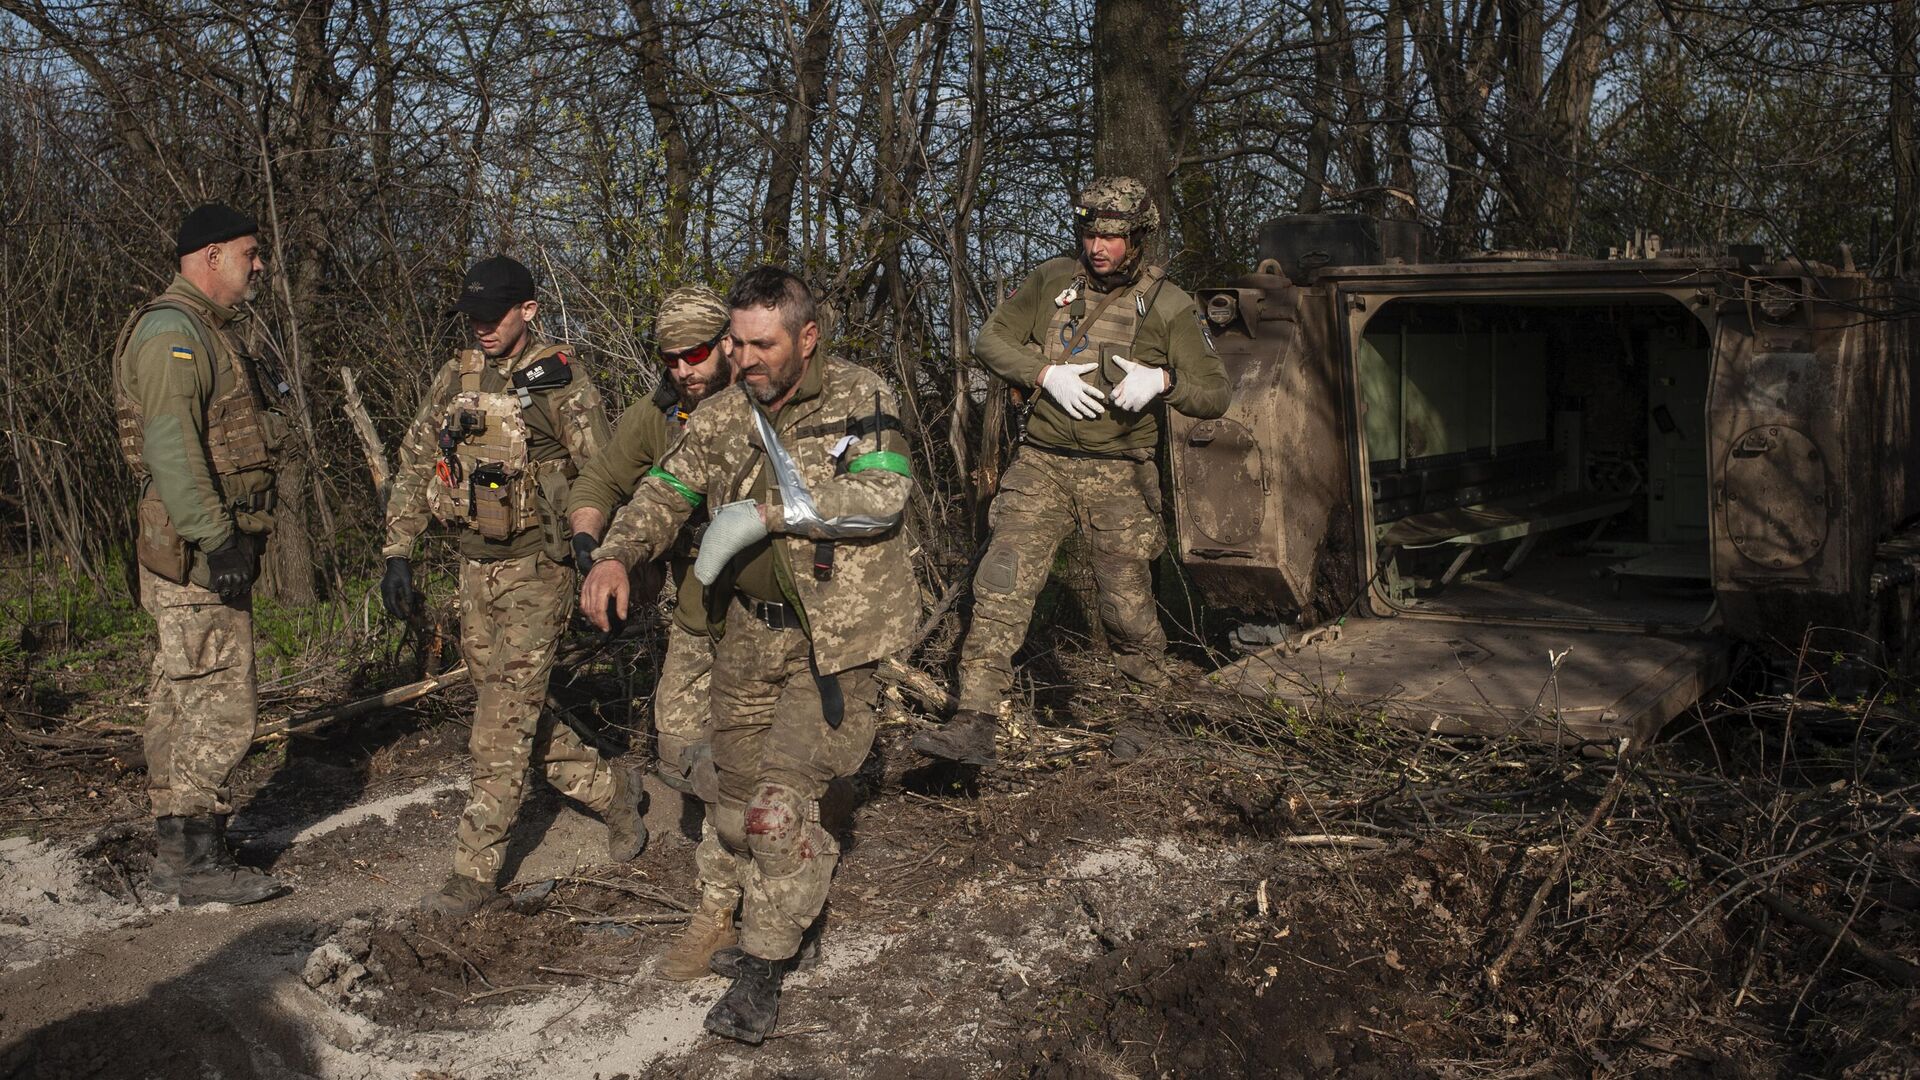 The Armed Forces of Ukraine lost up to 120 soldiers in the South Donetsk and Zaporozhye directions